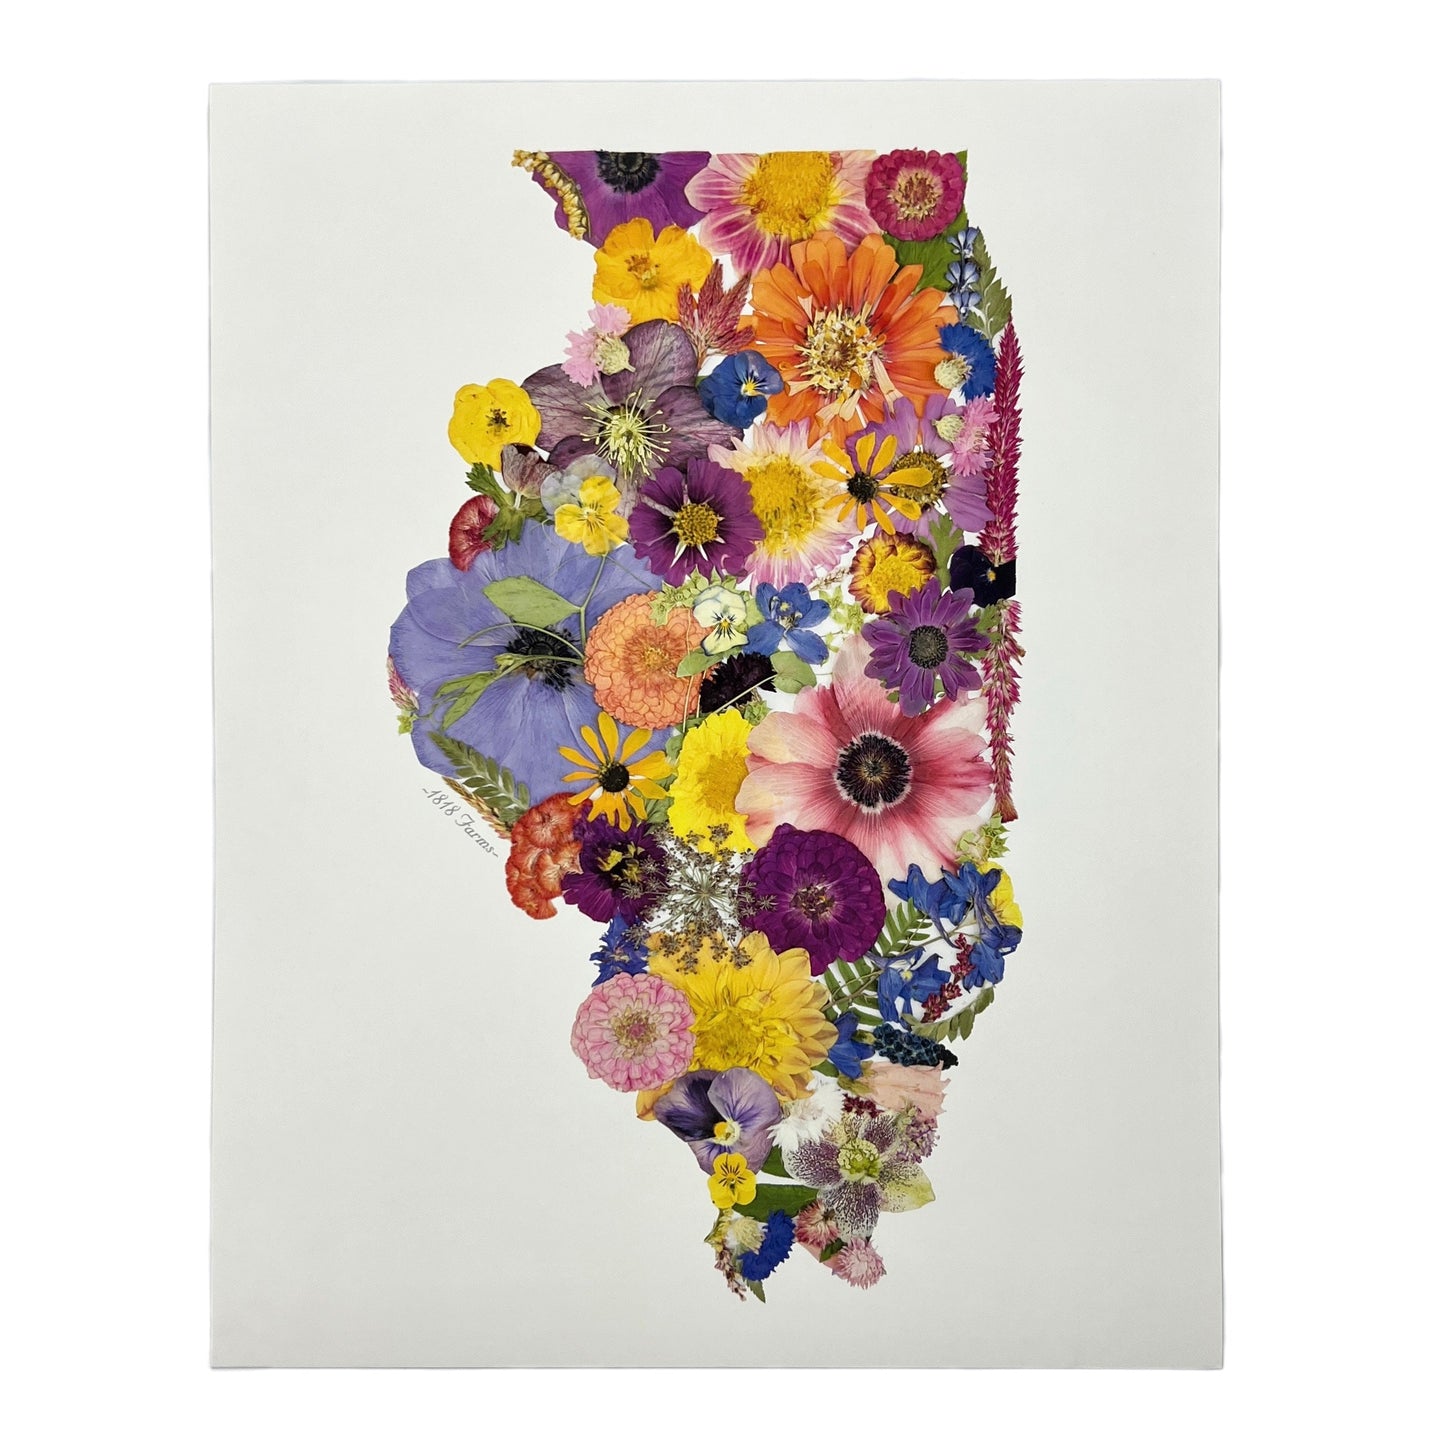 State Themed Giclée Print  - "Where I Bloom" Collection Giclee Art Print 1818 Farms 8"x10" Illinois 